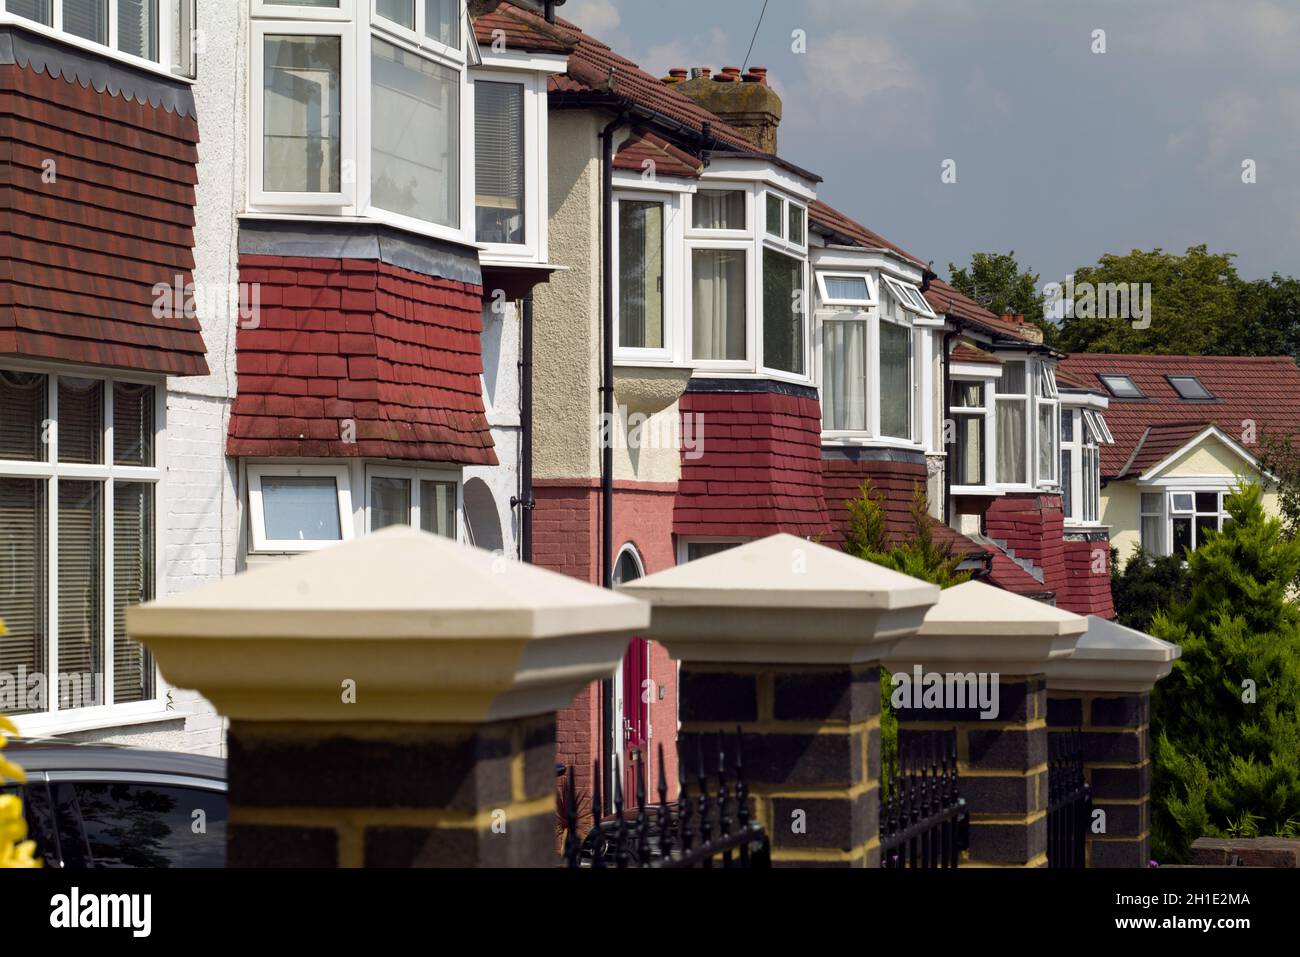 A row of high density suburban terraced houses in South West London. Stock Photo